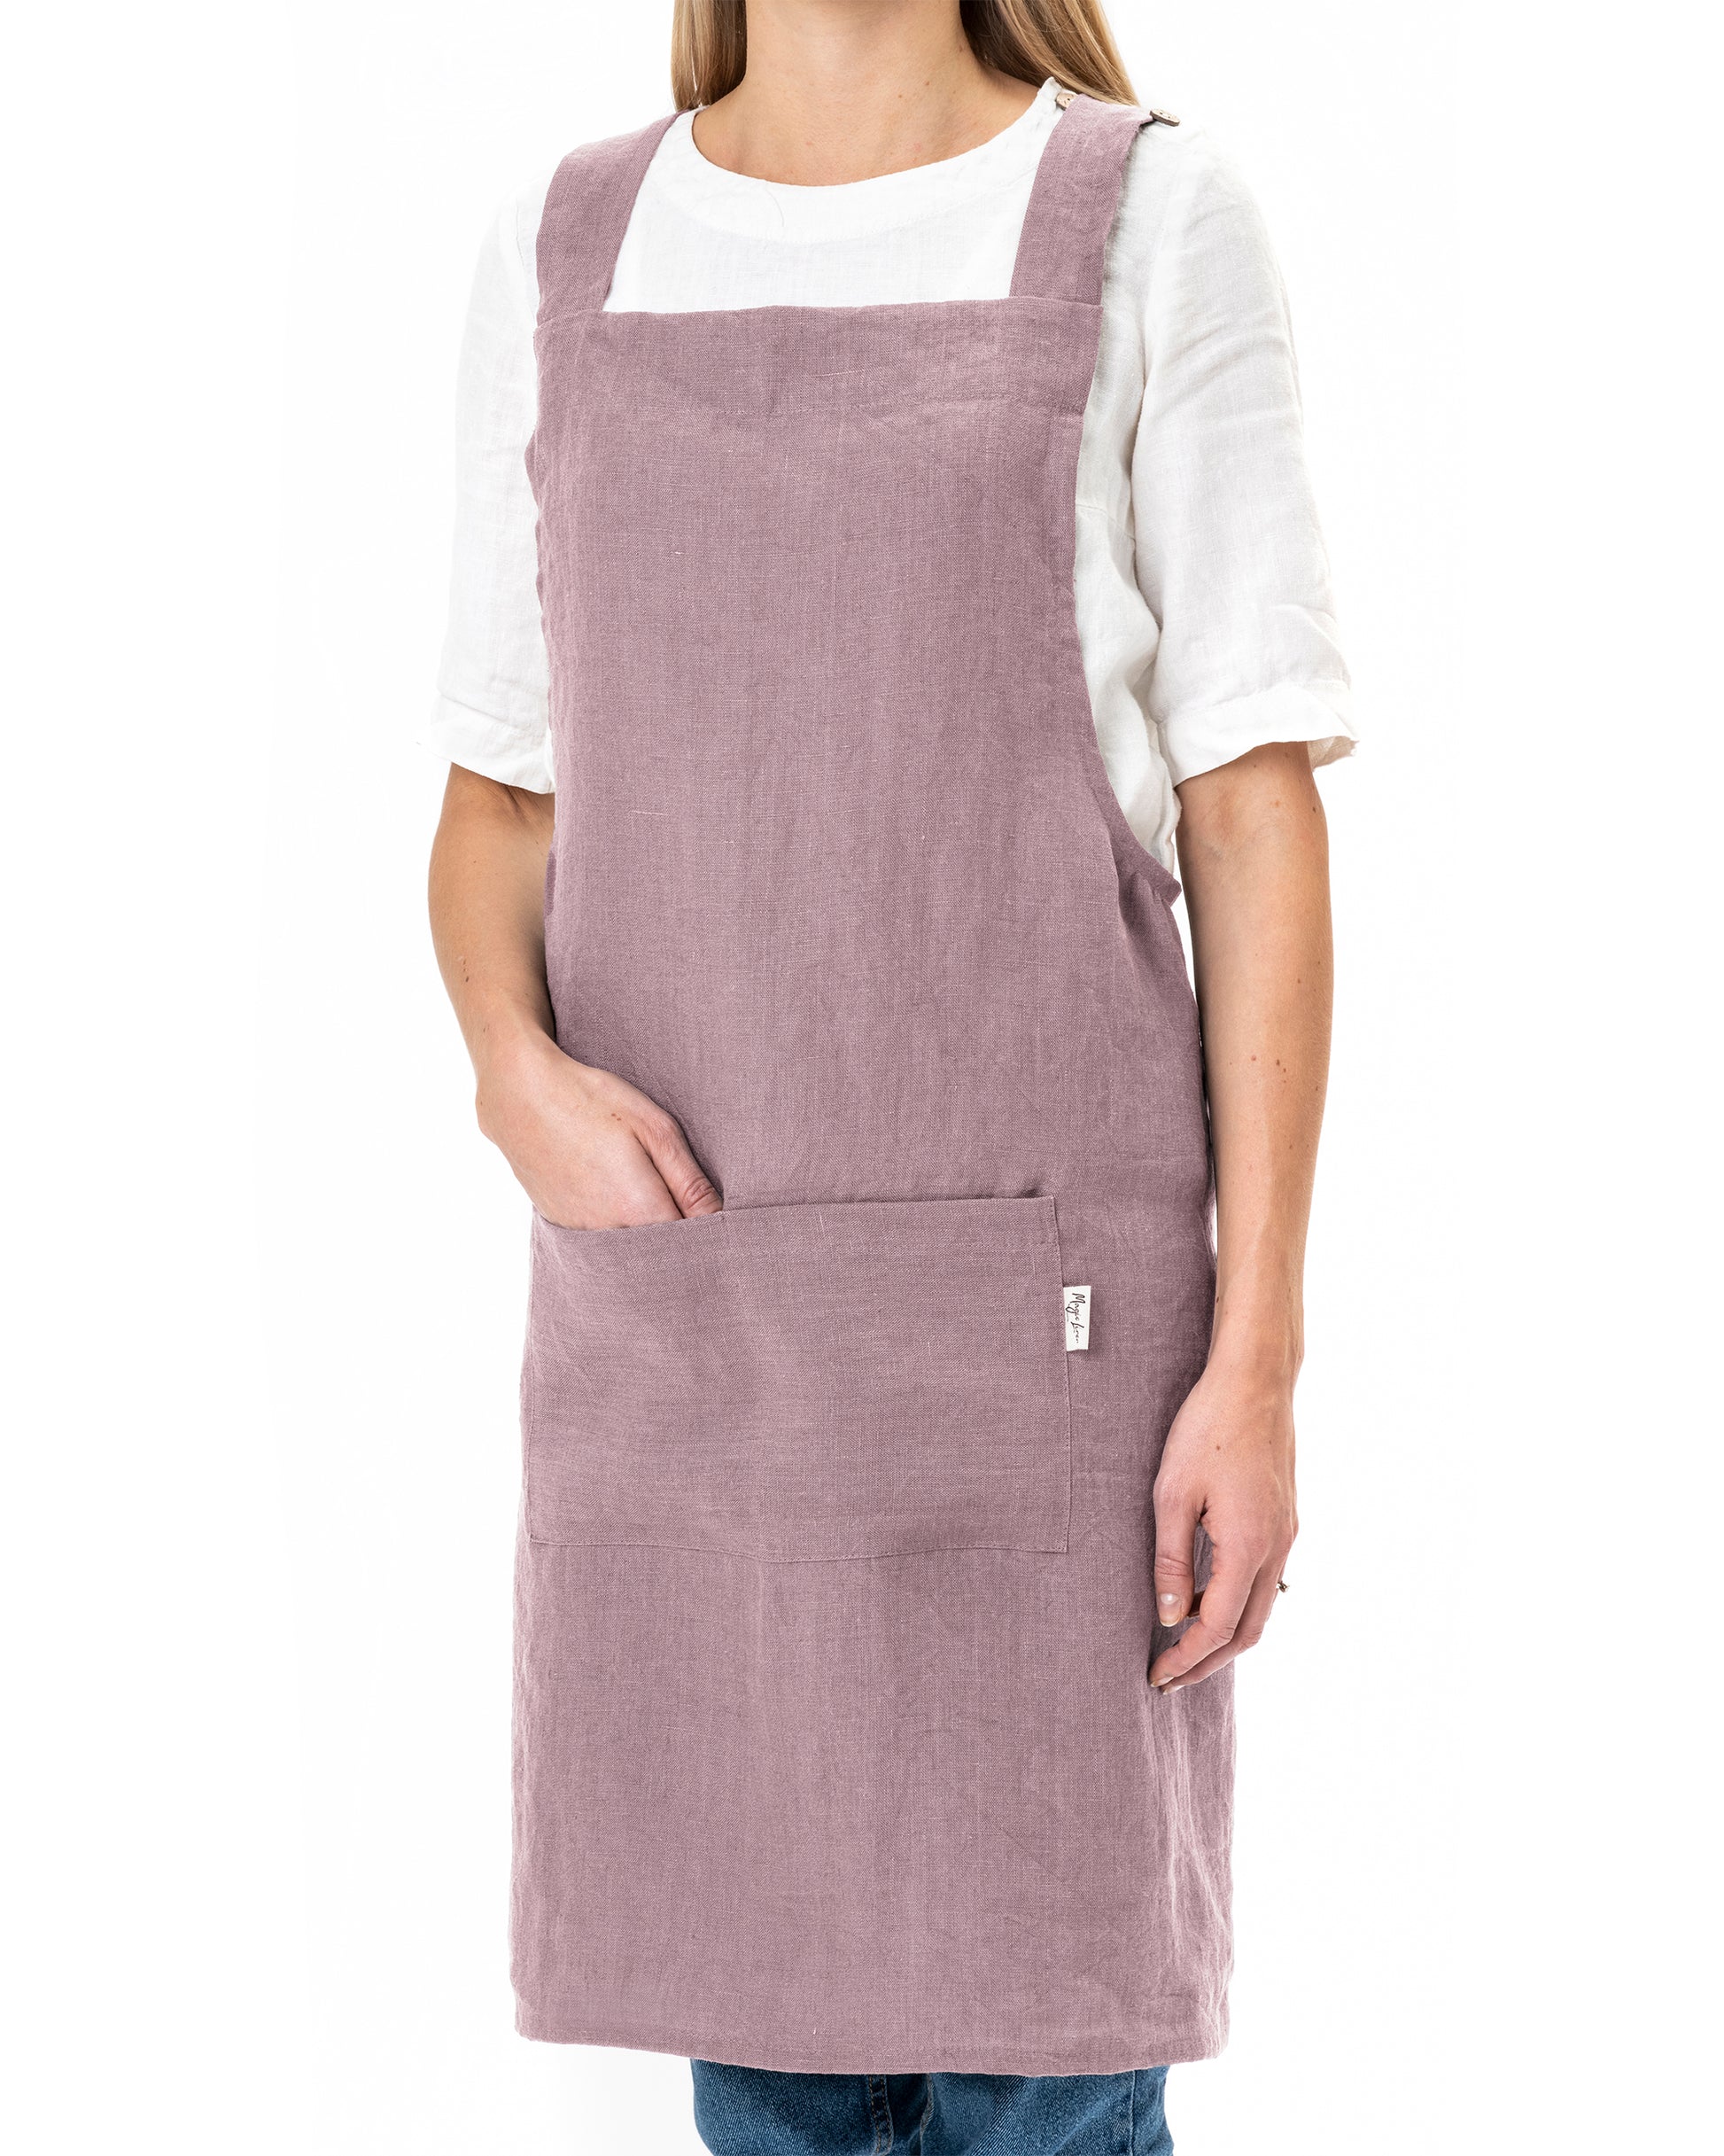 Cross Back Chef Apron, Coral Pink with White Straps, Women or Men